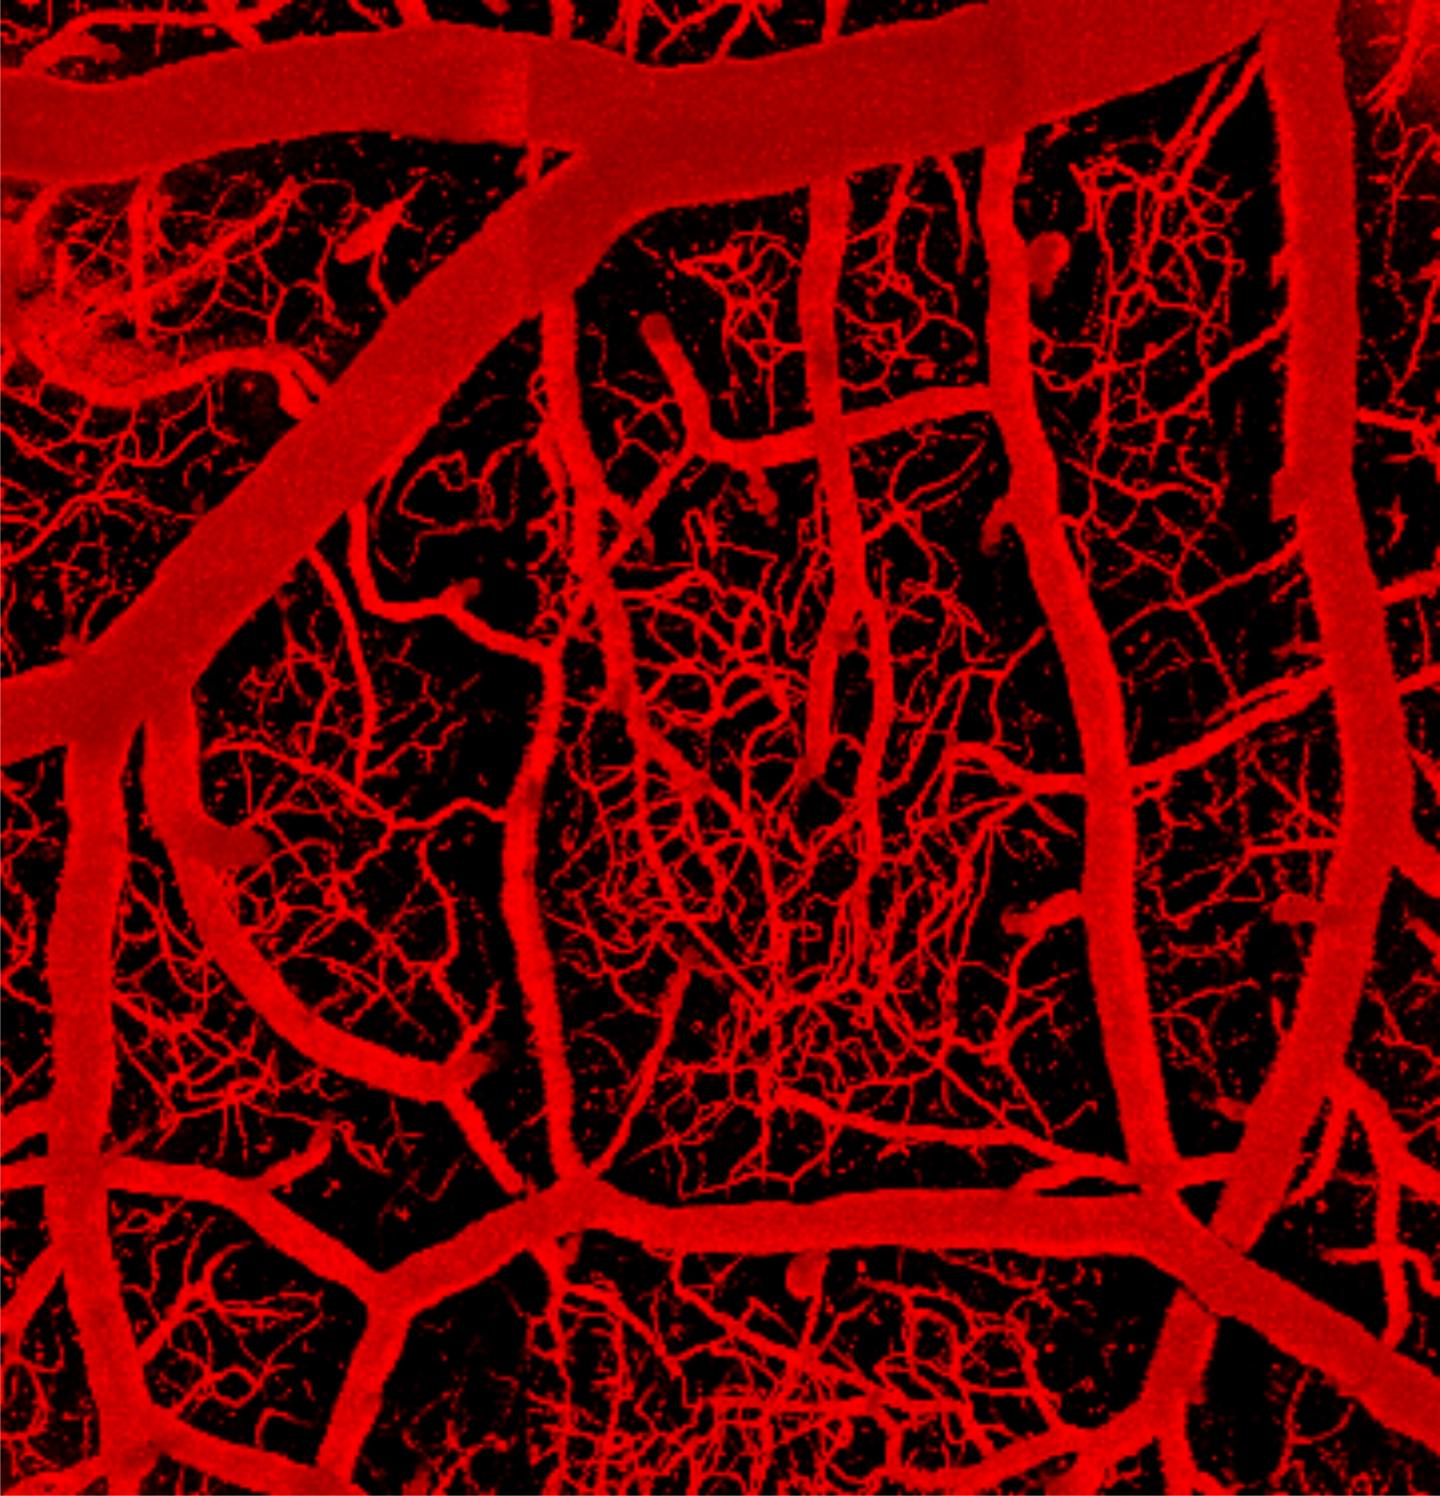 The brain's vascular network, shown in this image, consists of arteries that penetrate into the brain to feed a vast capillary network, which is then drained by veins. [Thomas Longden]